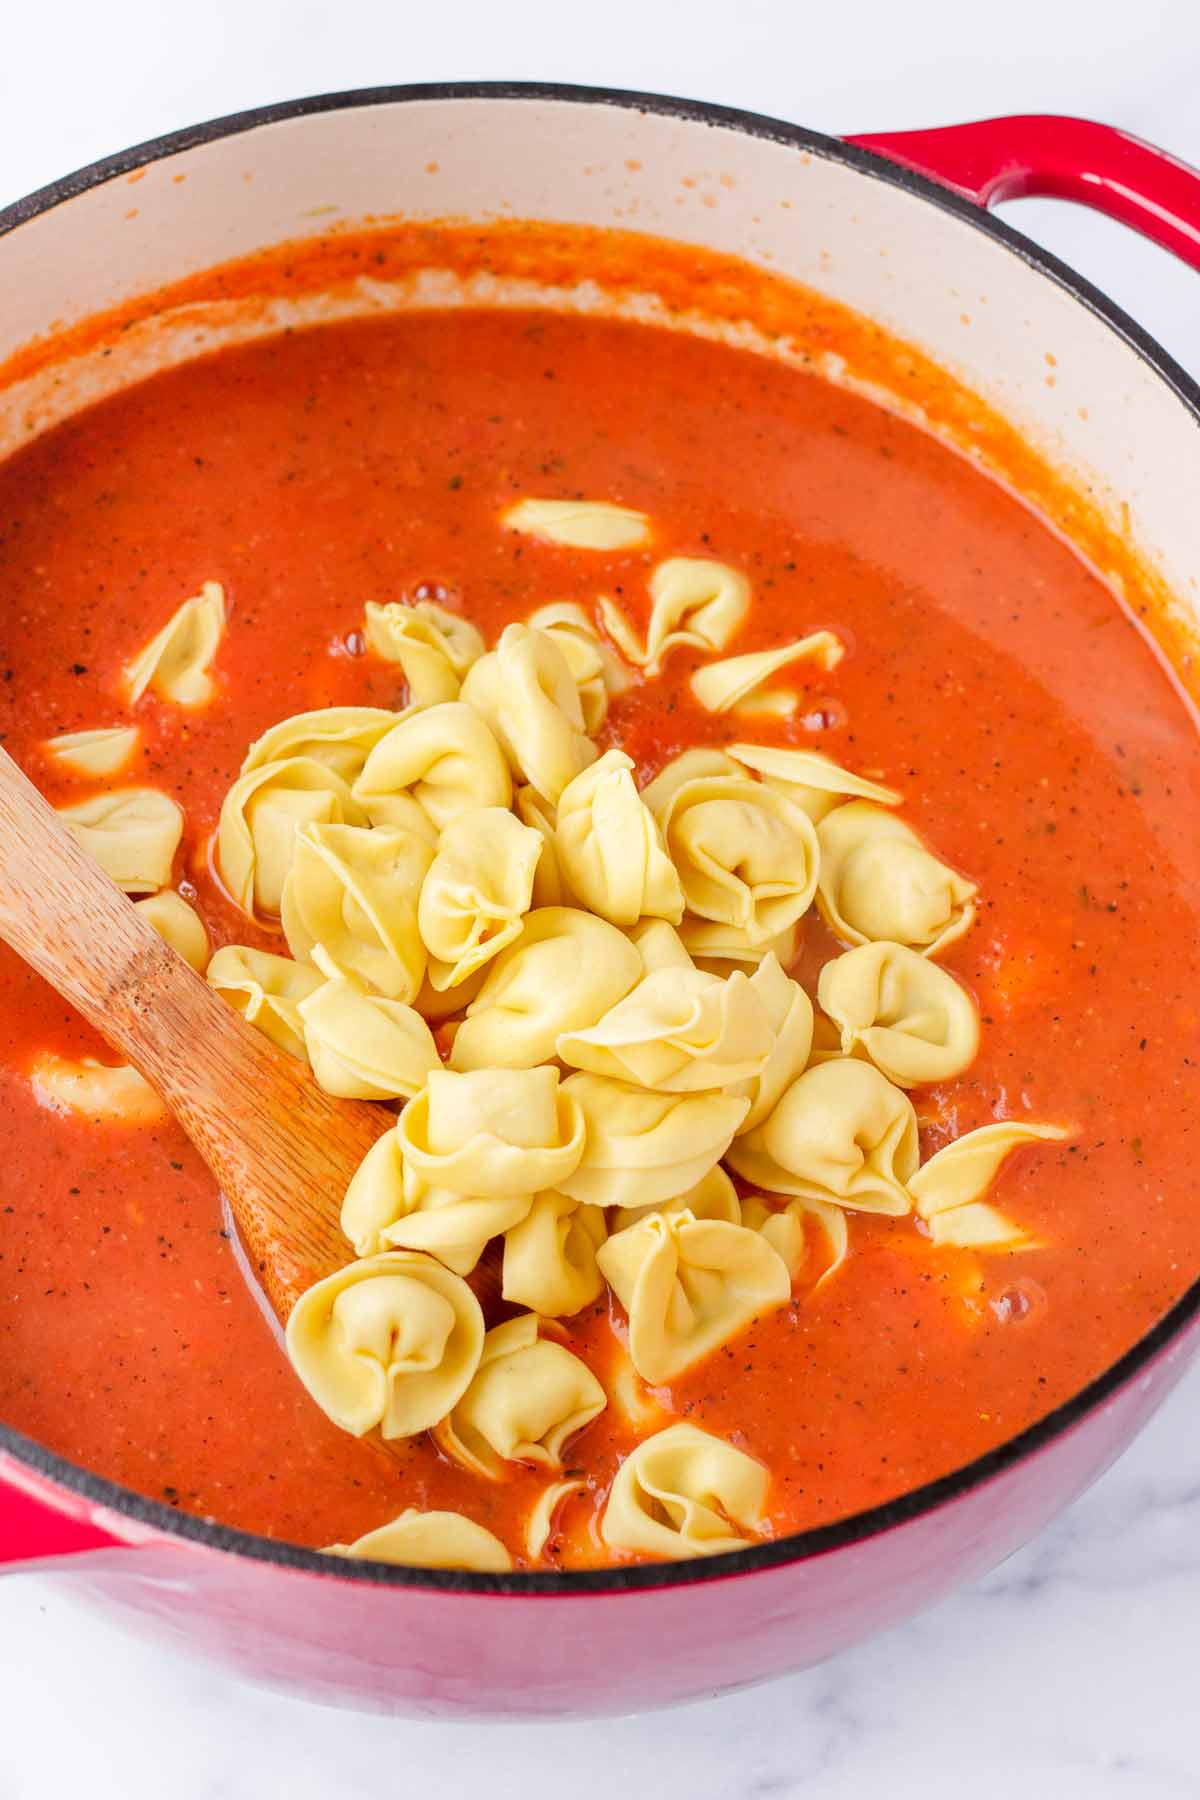 adding cheese tortellini to the tomato broth in the pot